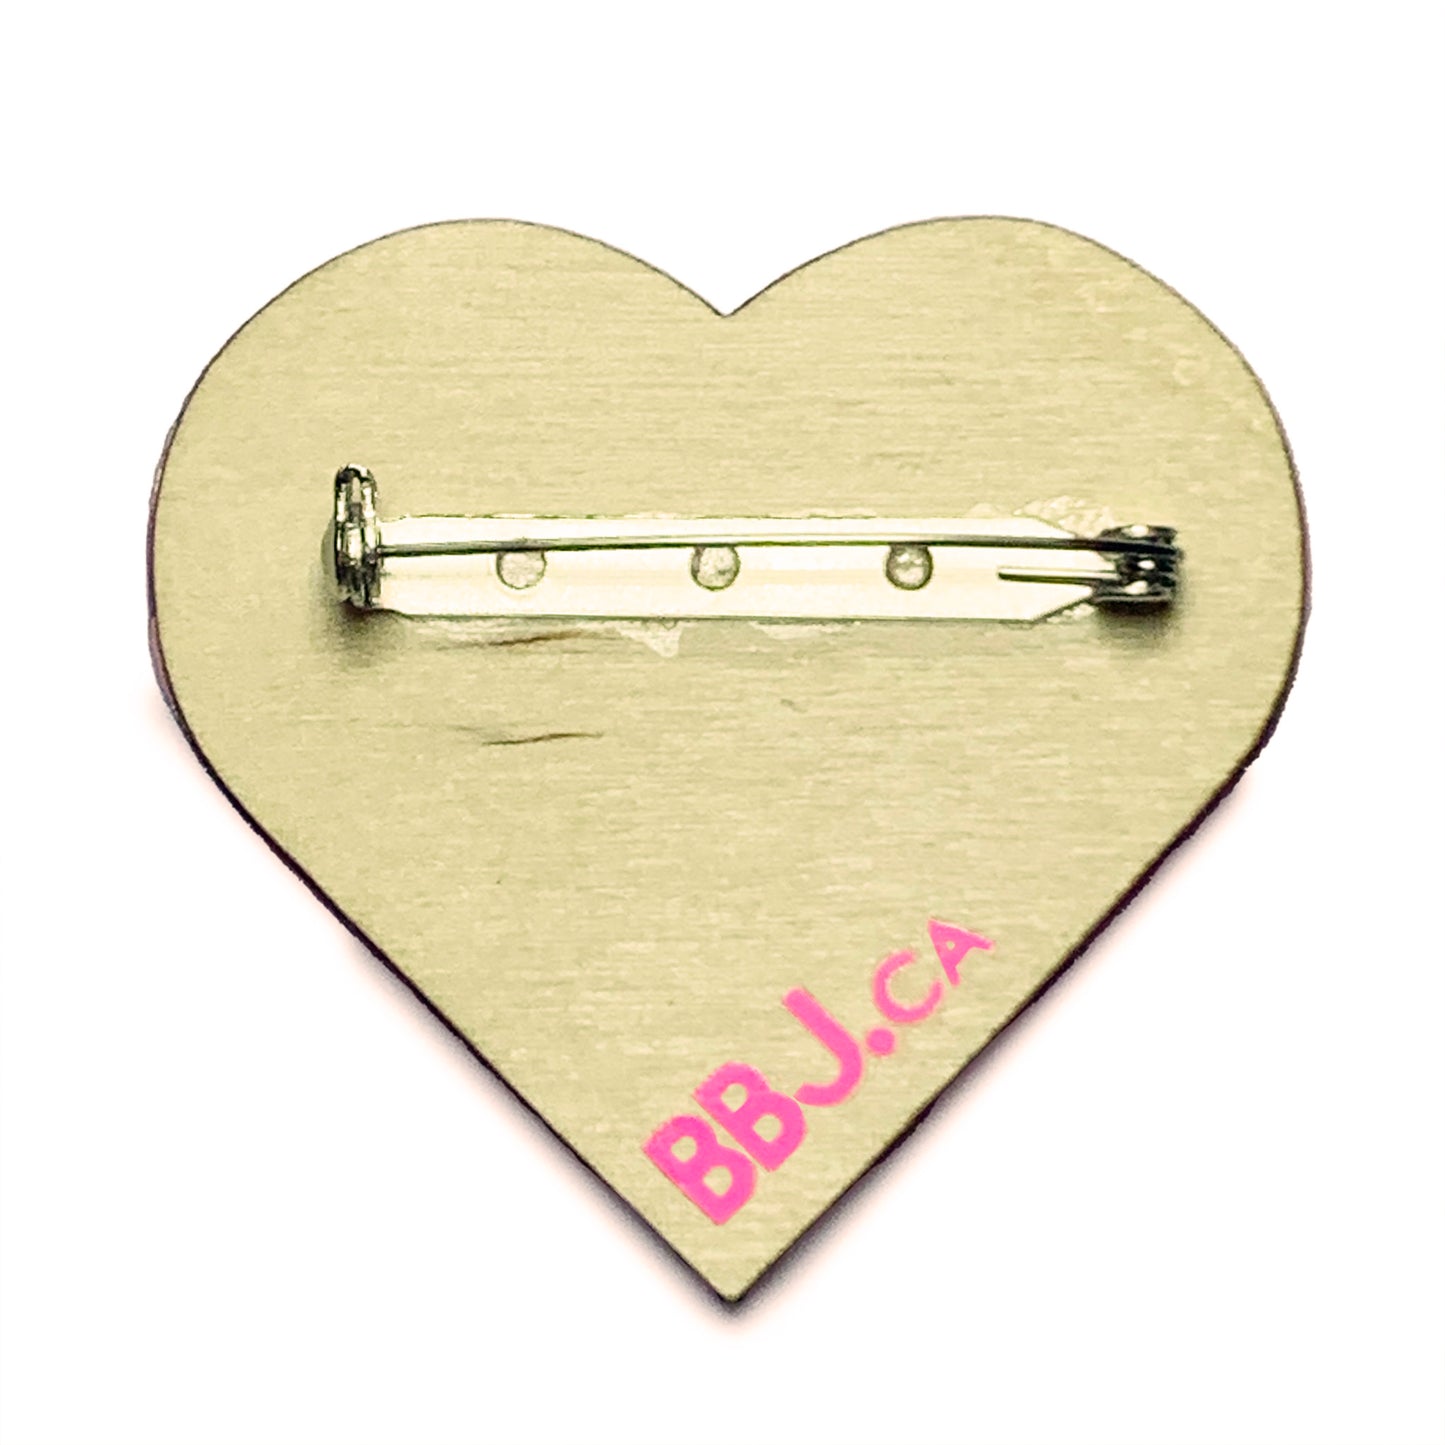 "Heart On" heart-shaped wood and vinyl pin - wood back with locking bar pin and BBJ signature in neon pink matte